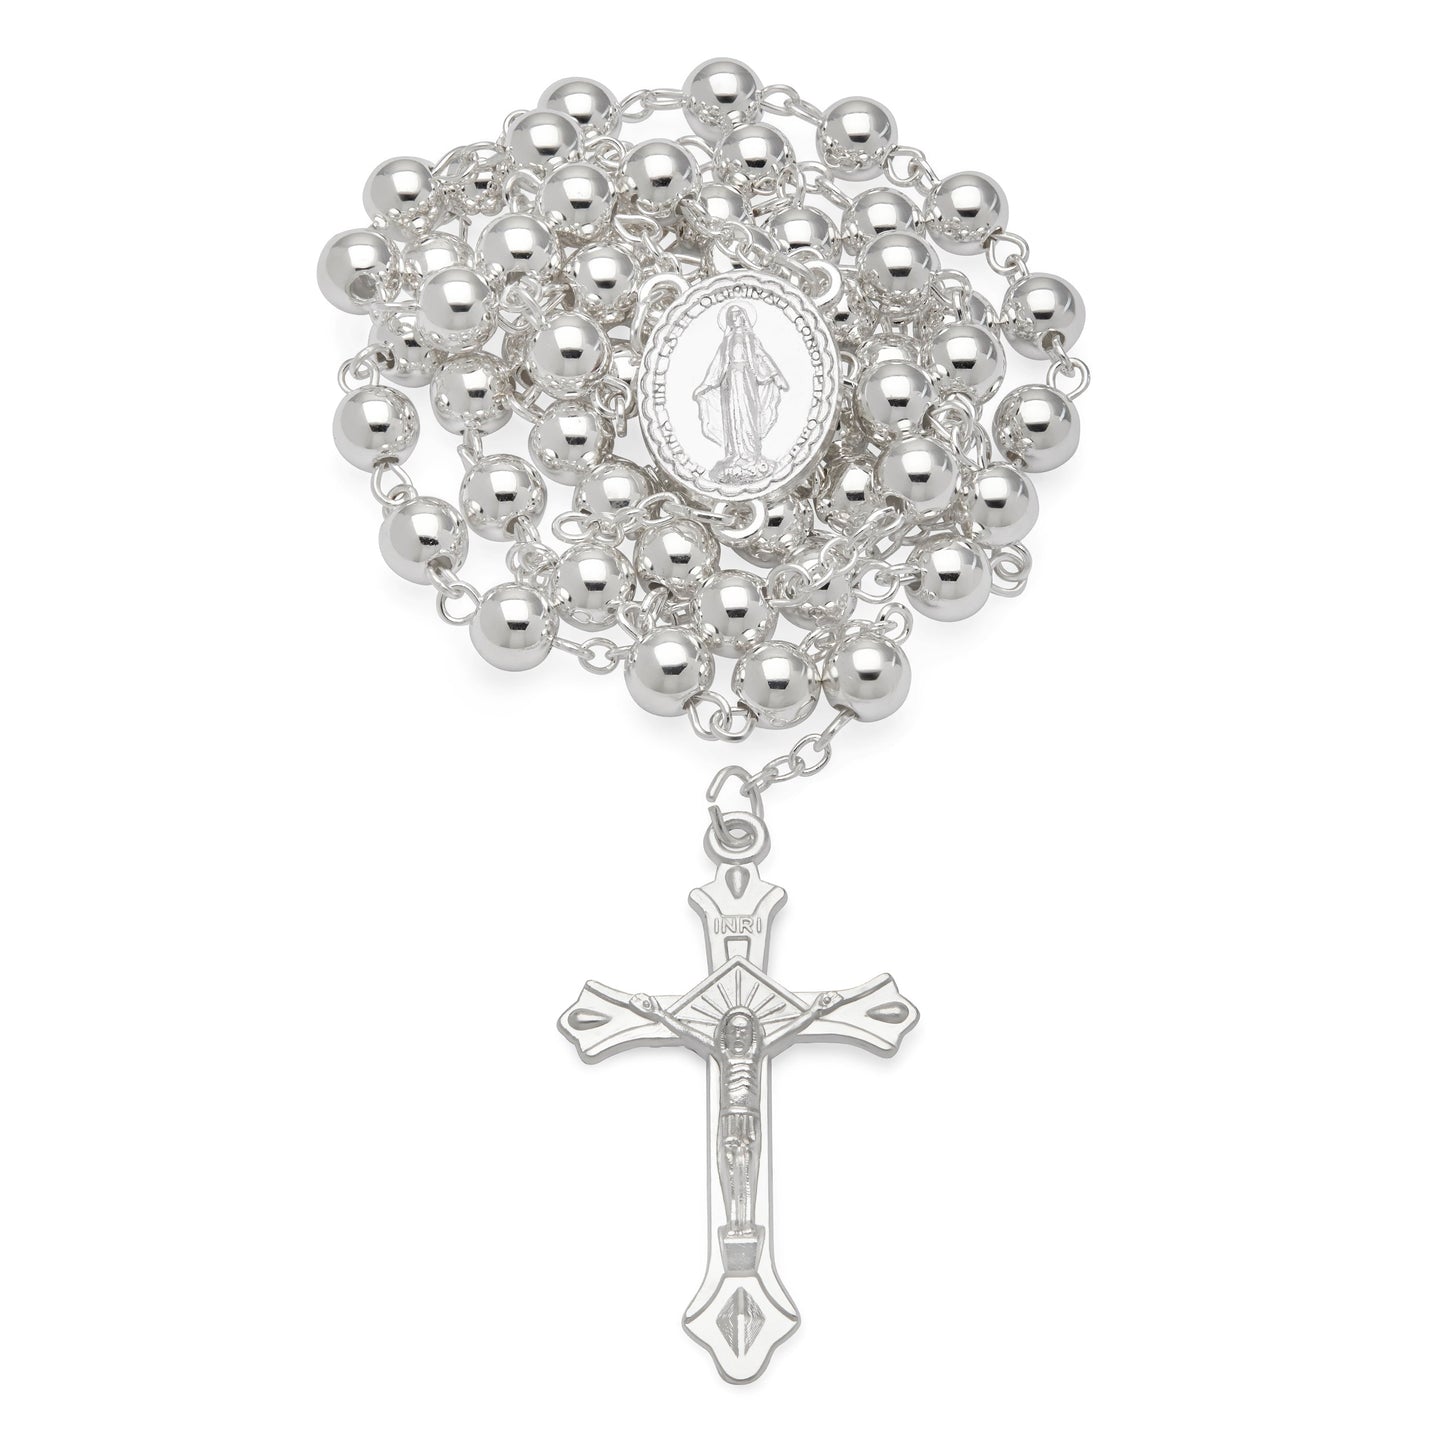 MONDO CATTOLICO Prayer Beads 51 cm (20.07 in) / 6 mm (0.23 in) Miraculous Virgin Rosary with Filigree Box